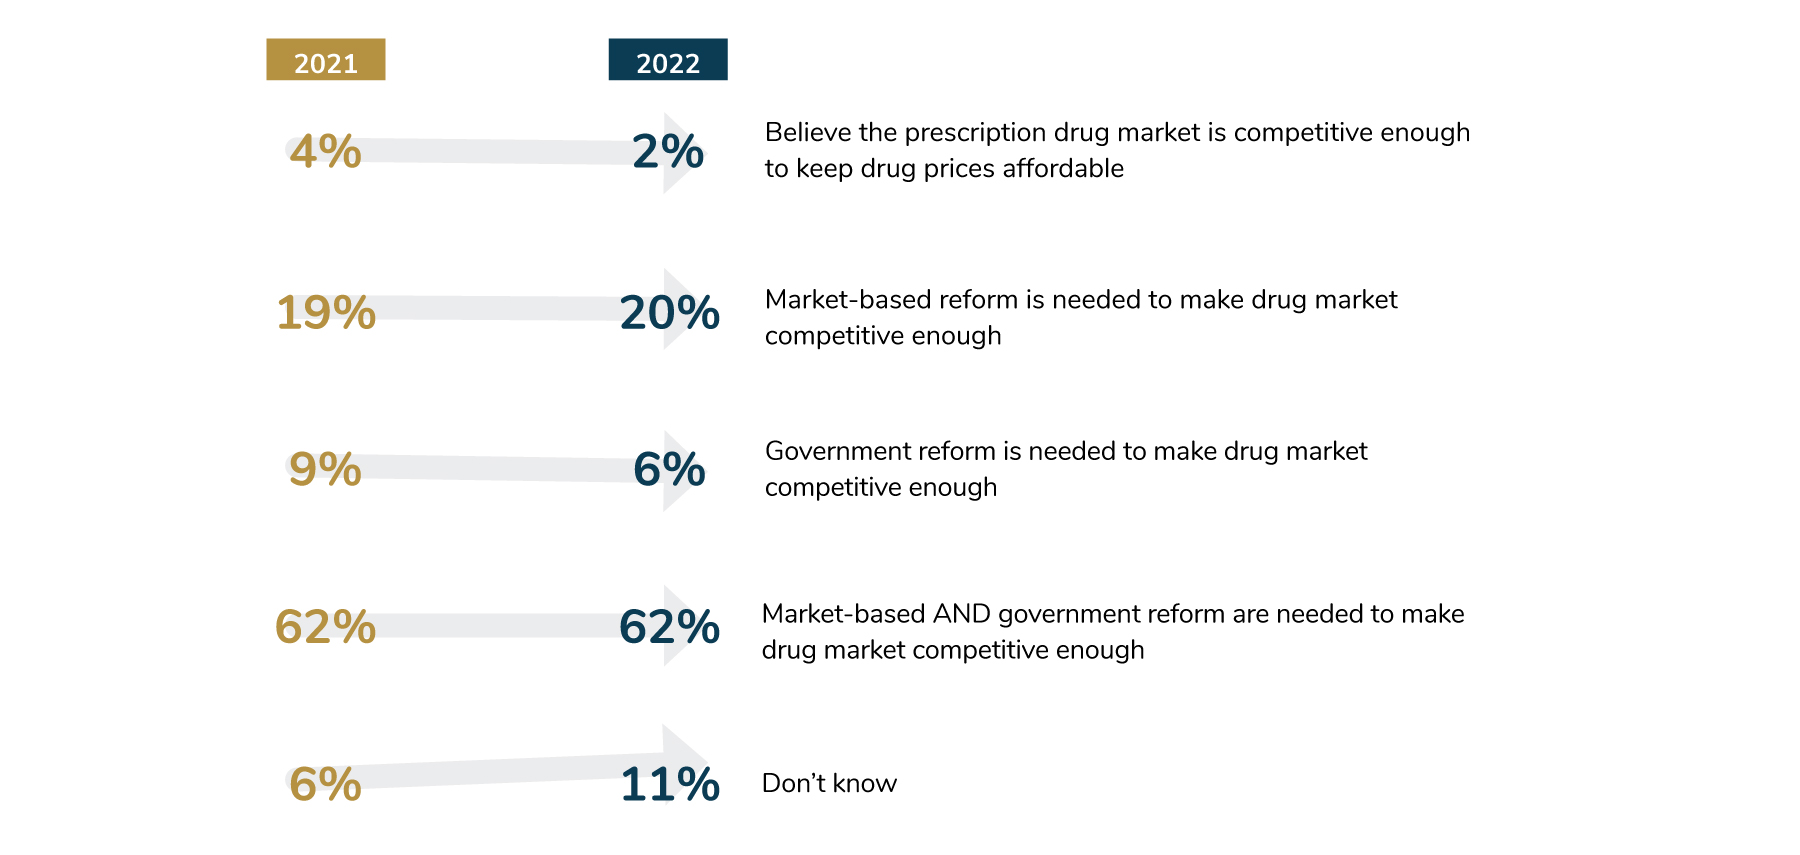 62% of employers believe there needs to be market-based and government reform for a competitive prescription drug market, 20% believe their just needs to be market-based reform, and 6% believe their just needs to be government reform.